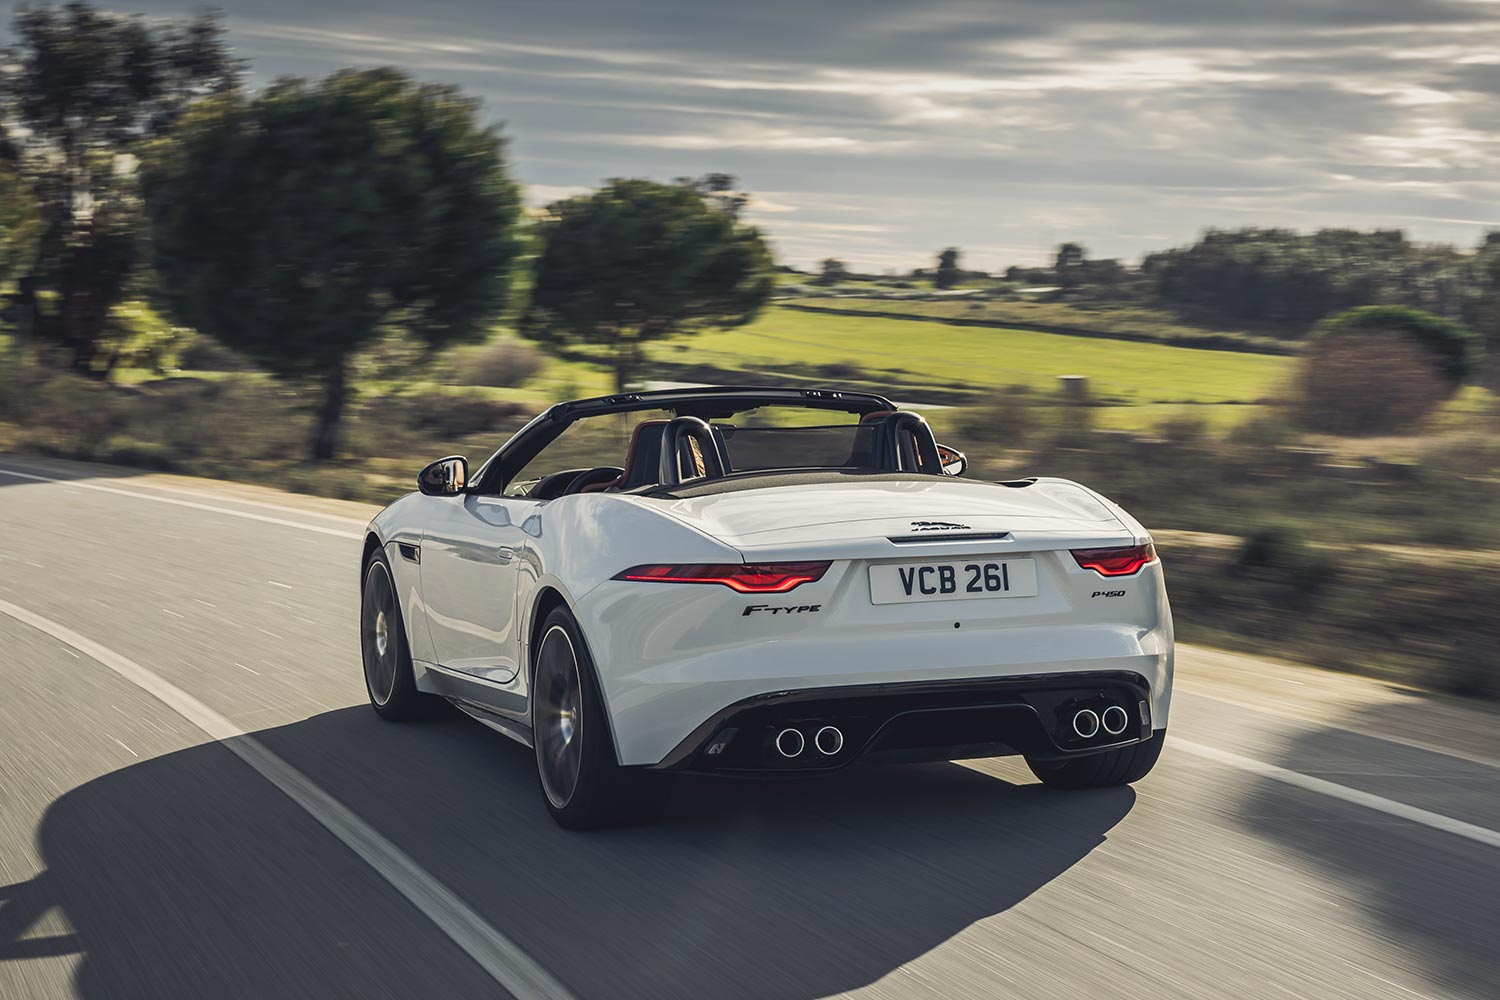 The rear end of the Jaguar F-Type Convertible as it drives down the road